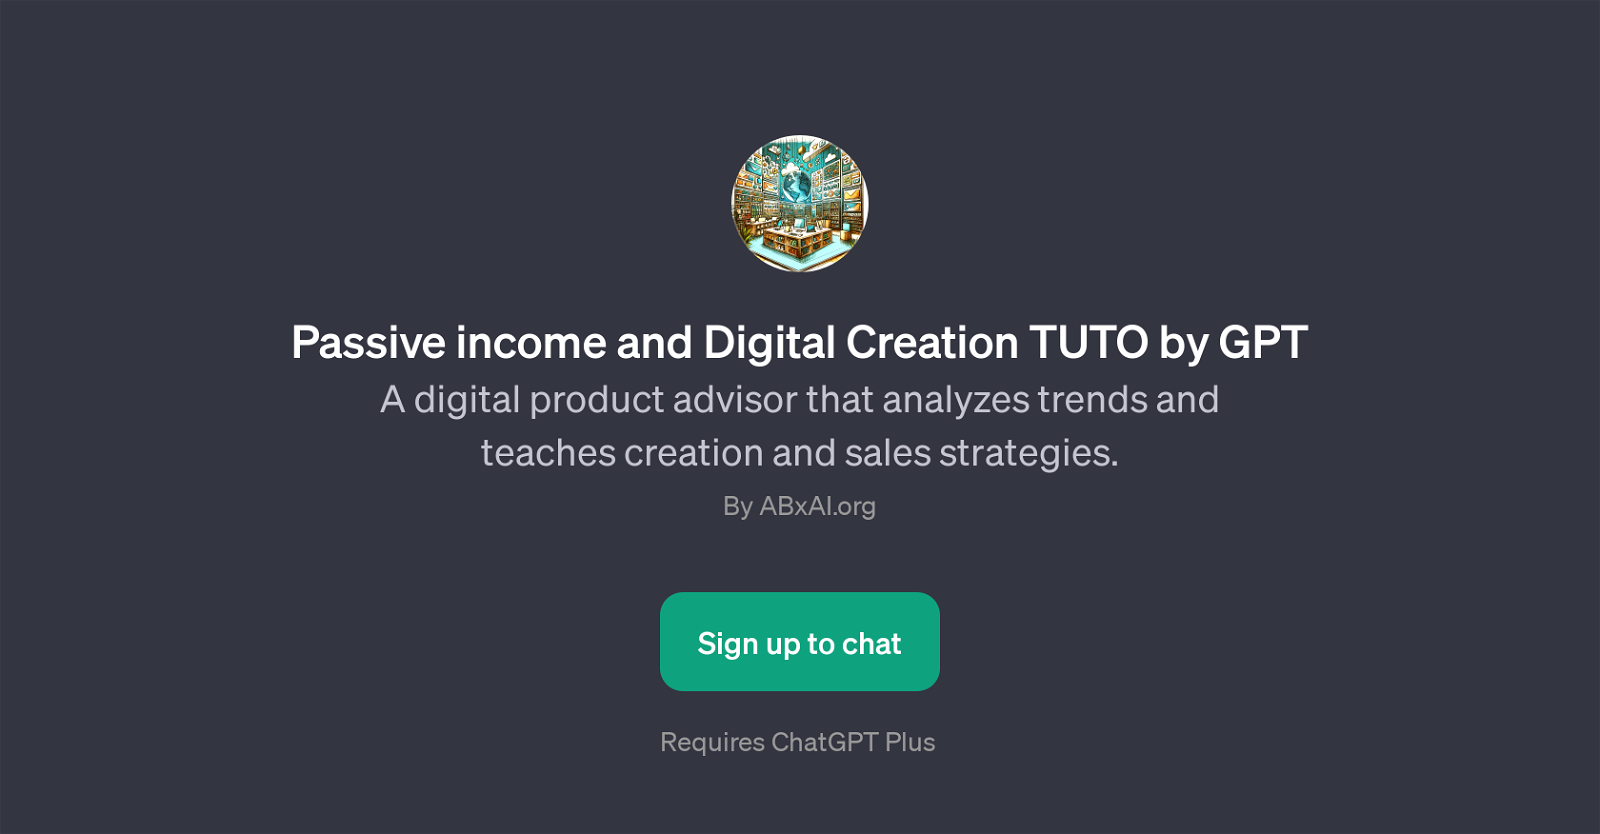 Passive income and Digital Creation TUTO by GPT website